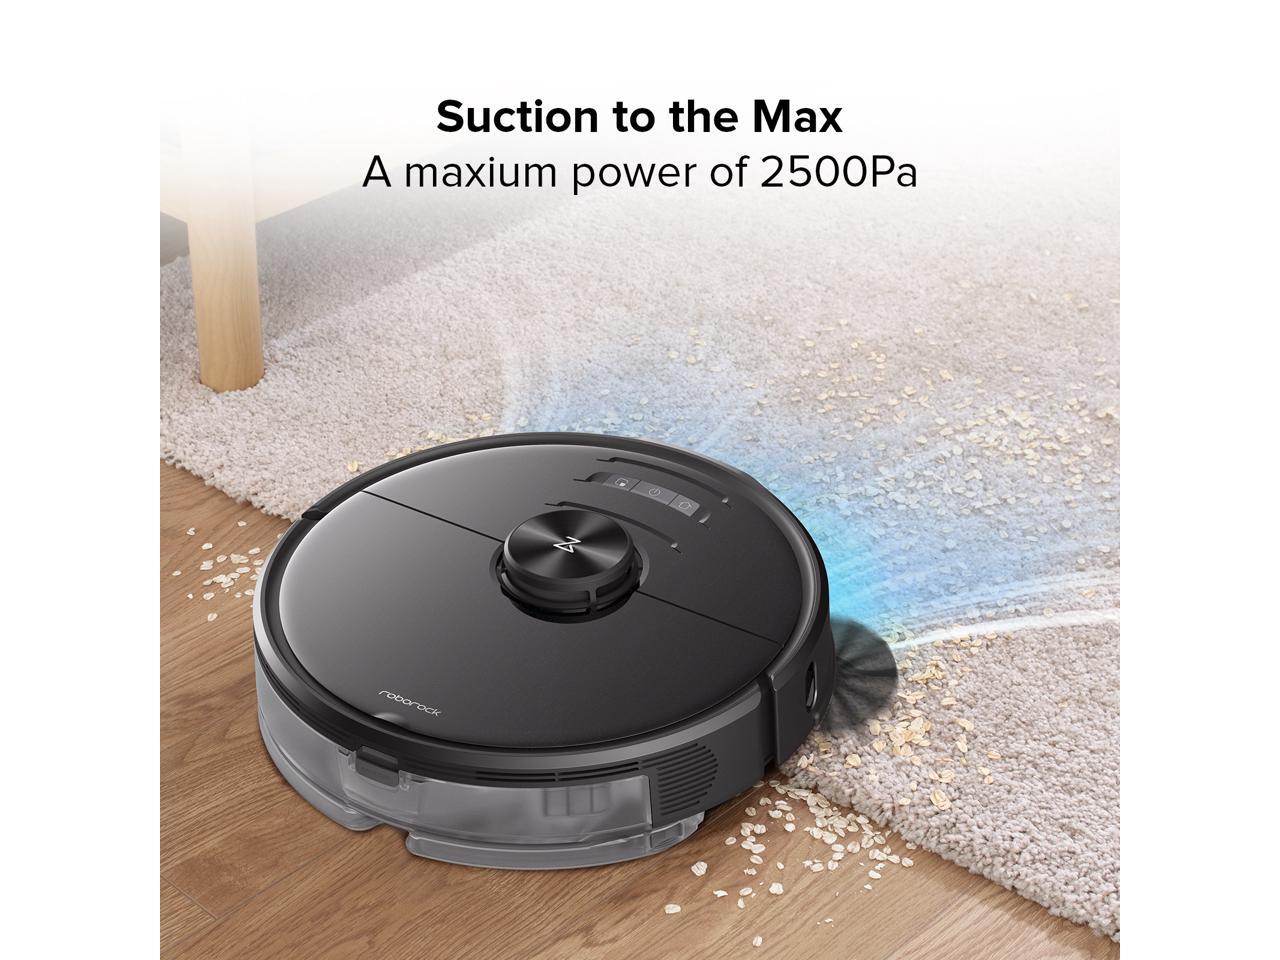 Roborock S6 MaxV review: A better 'seeing' robot vacuum